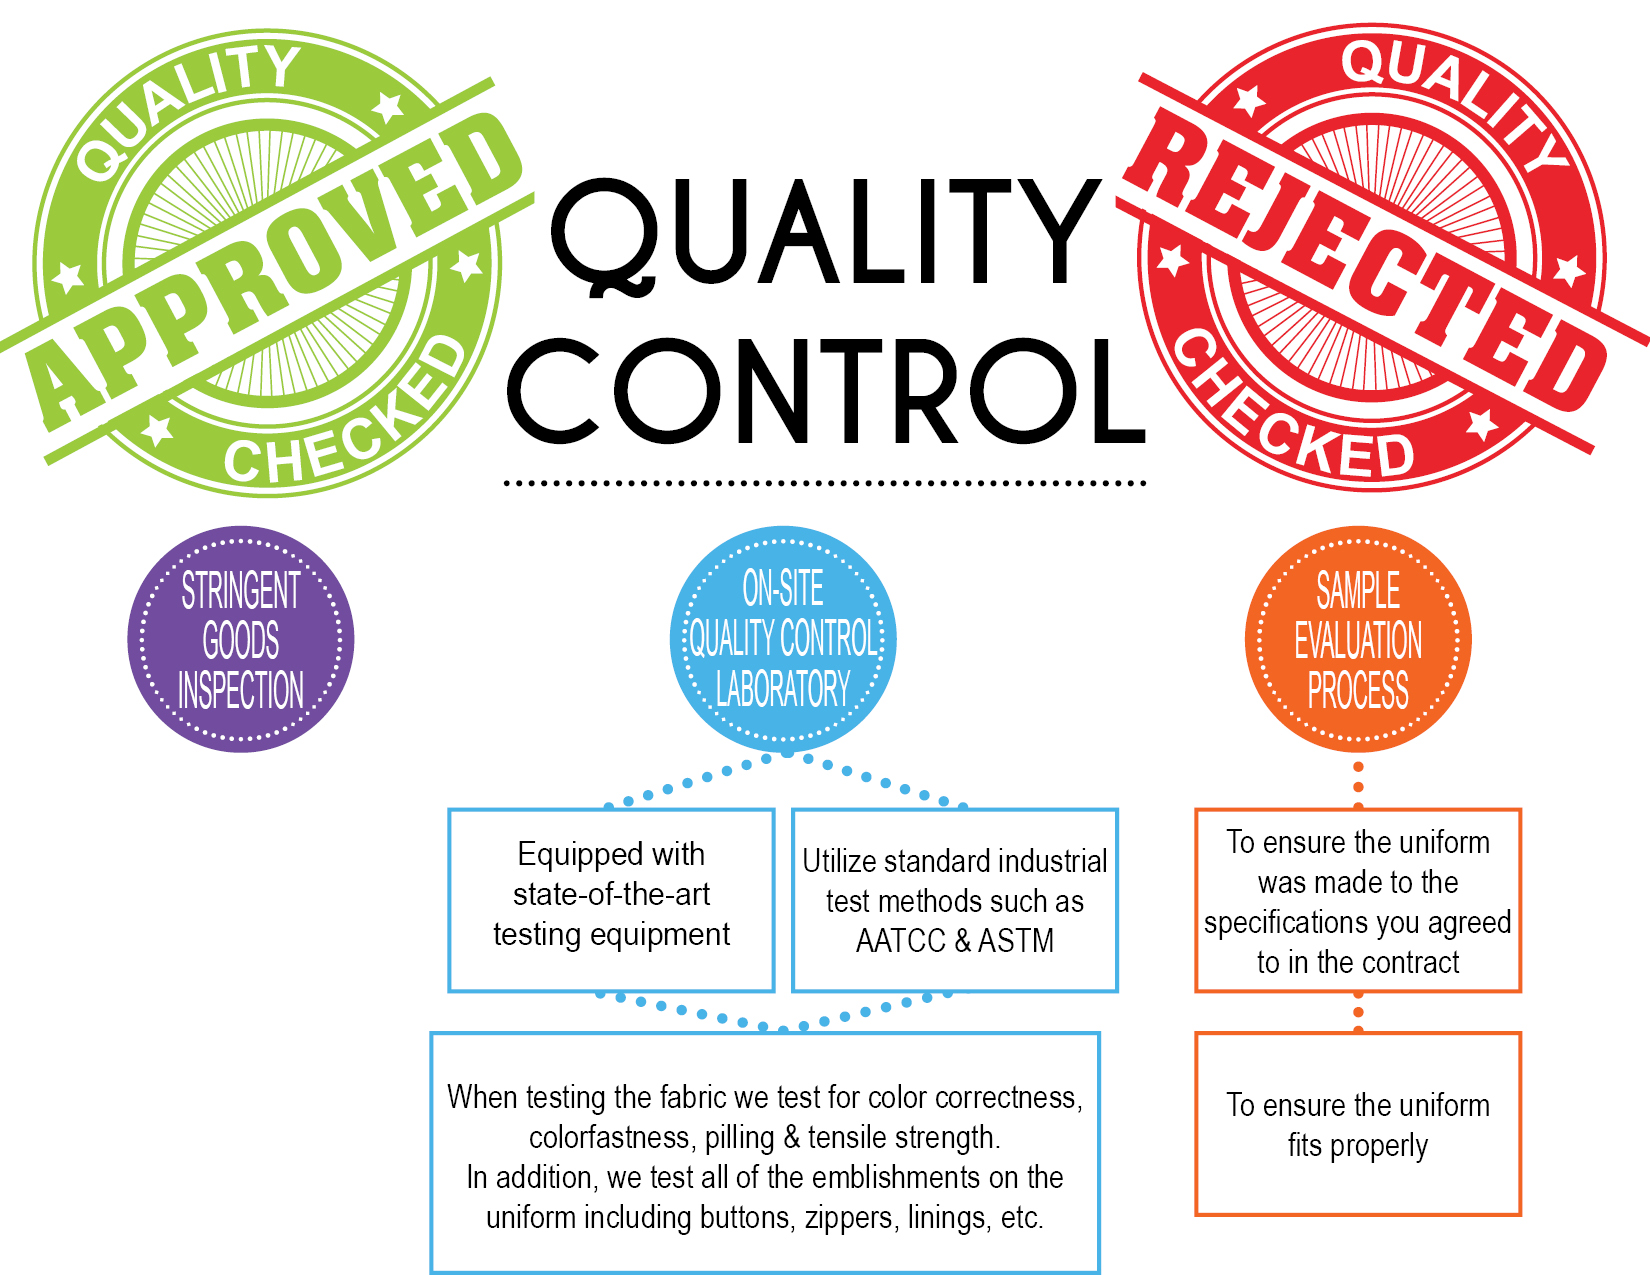 Quality Control by Fashion Seal Healthcare